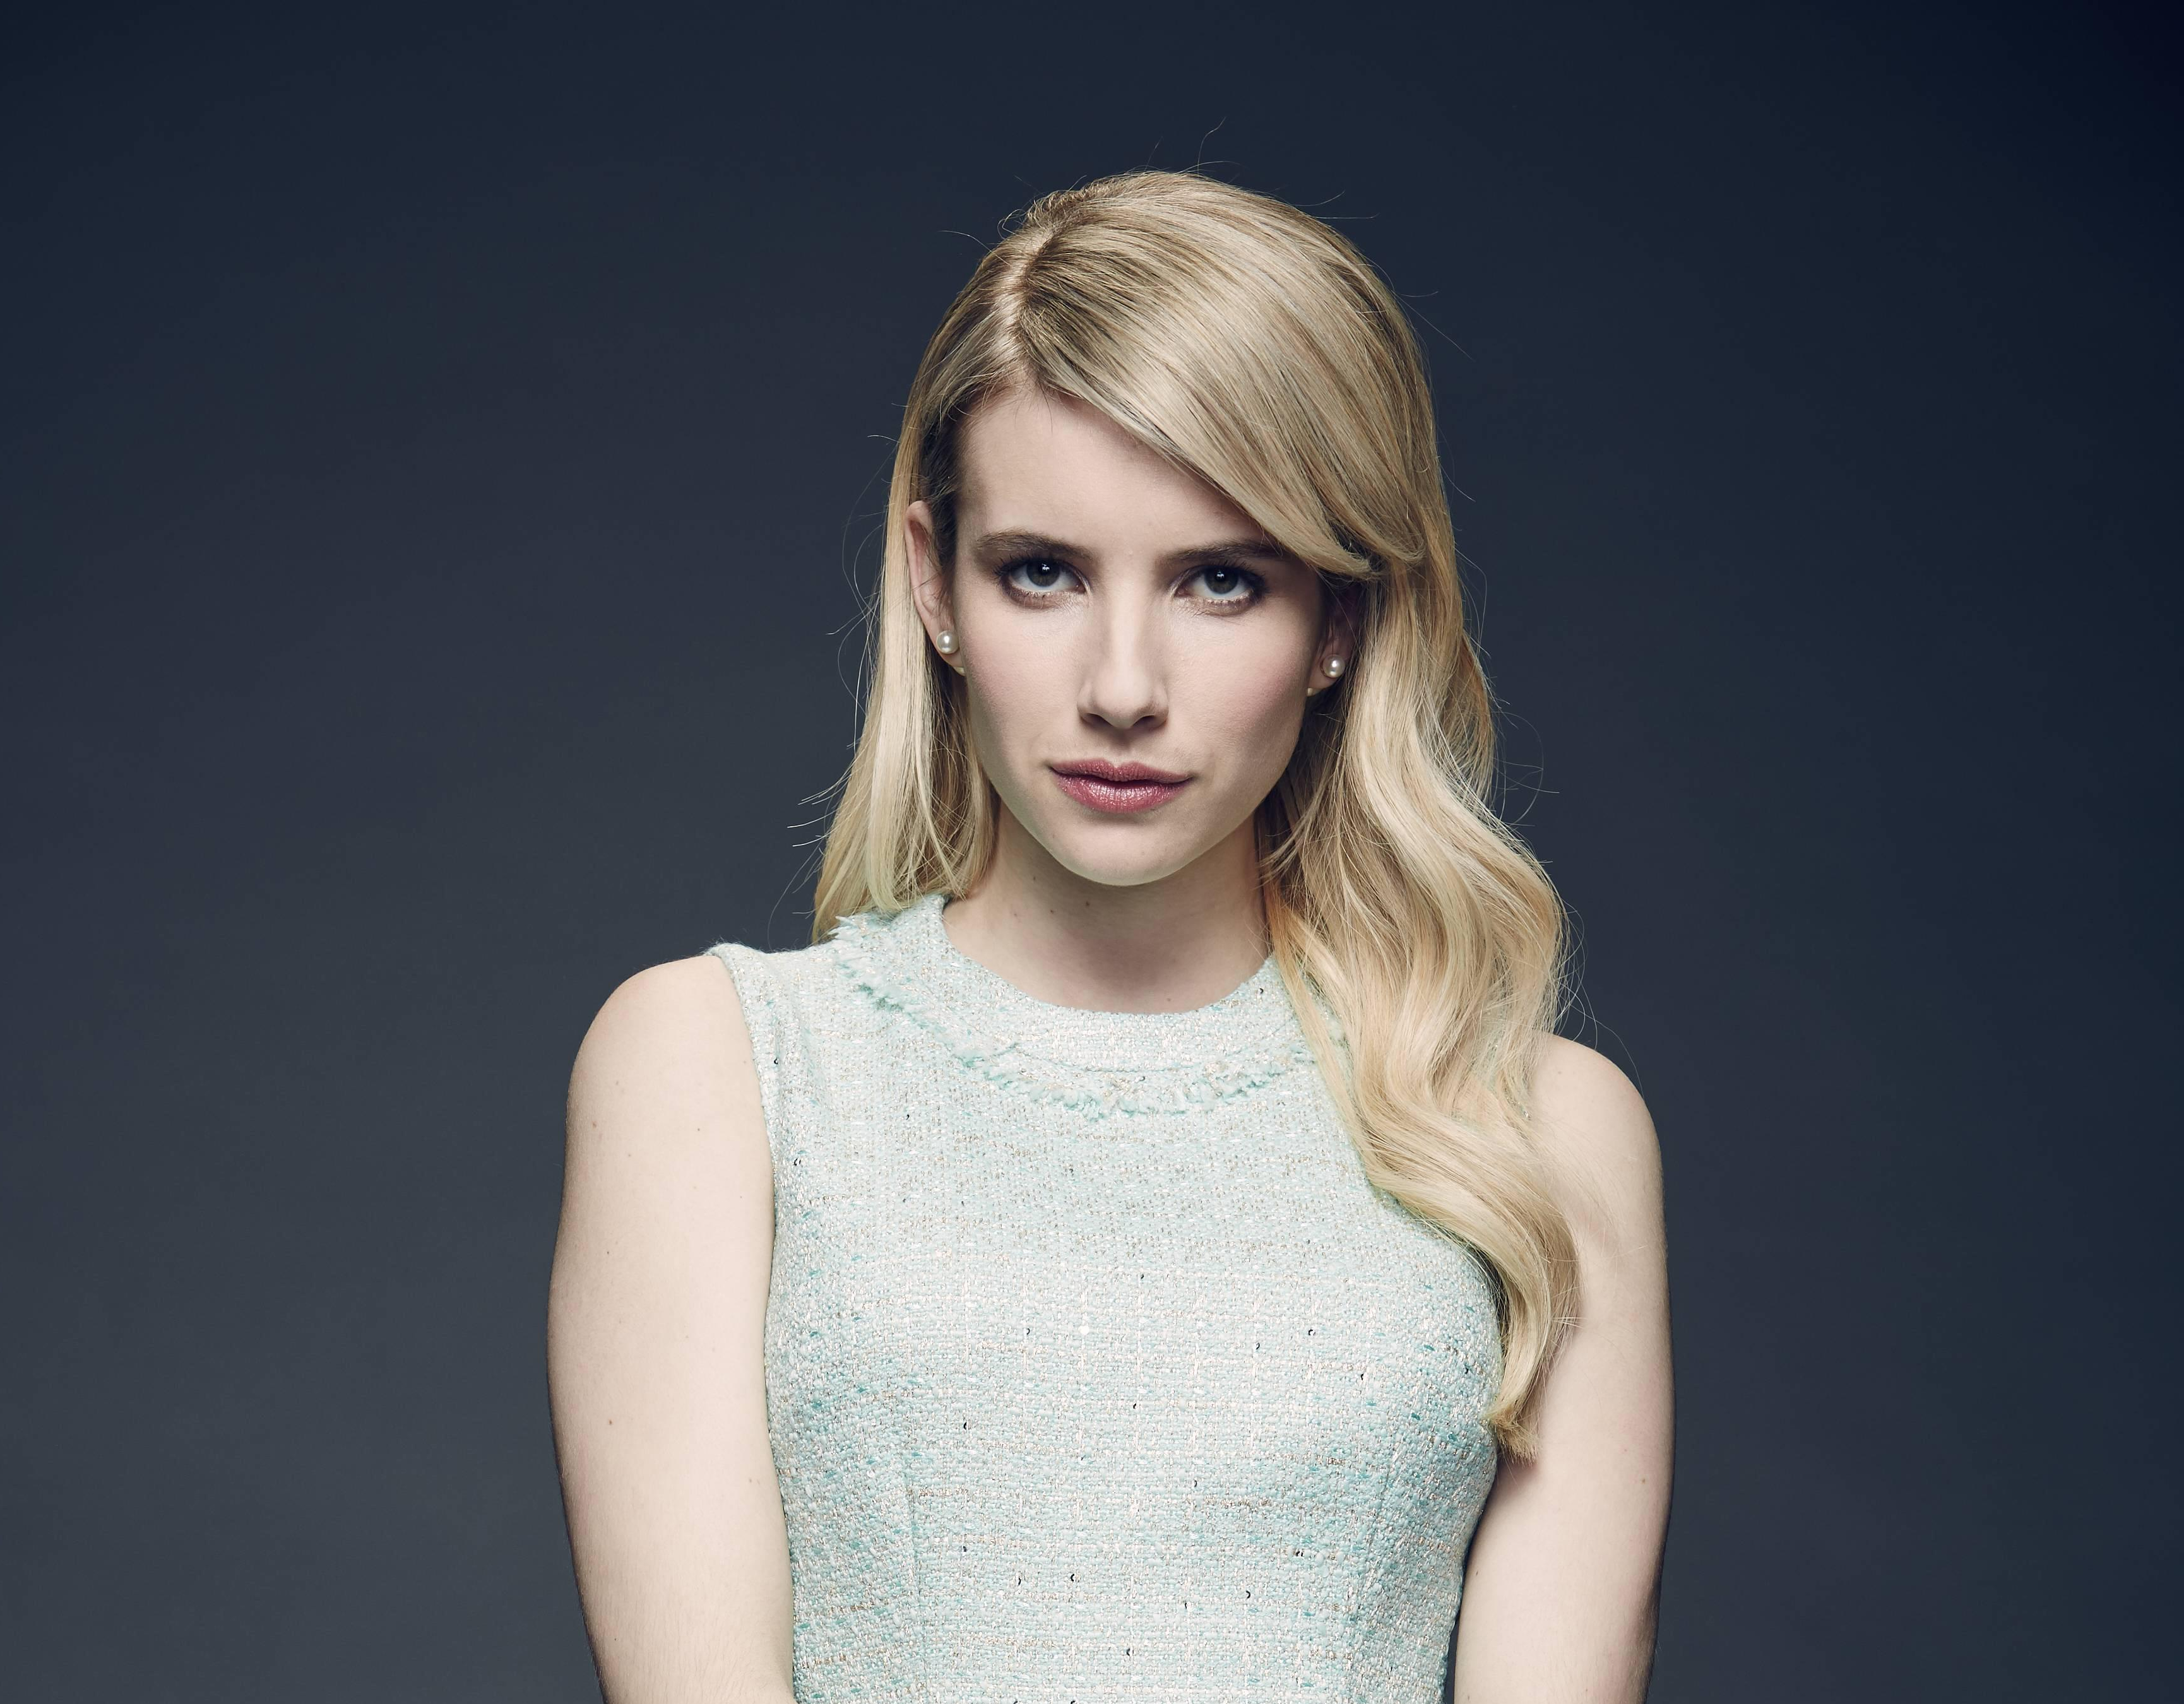 emma roberts wallpaper,hair,face,blond,hairstyle,fashion model